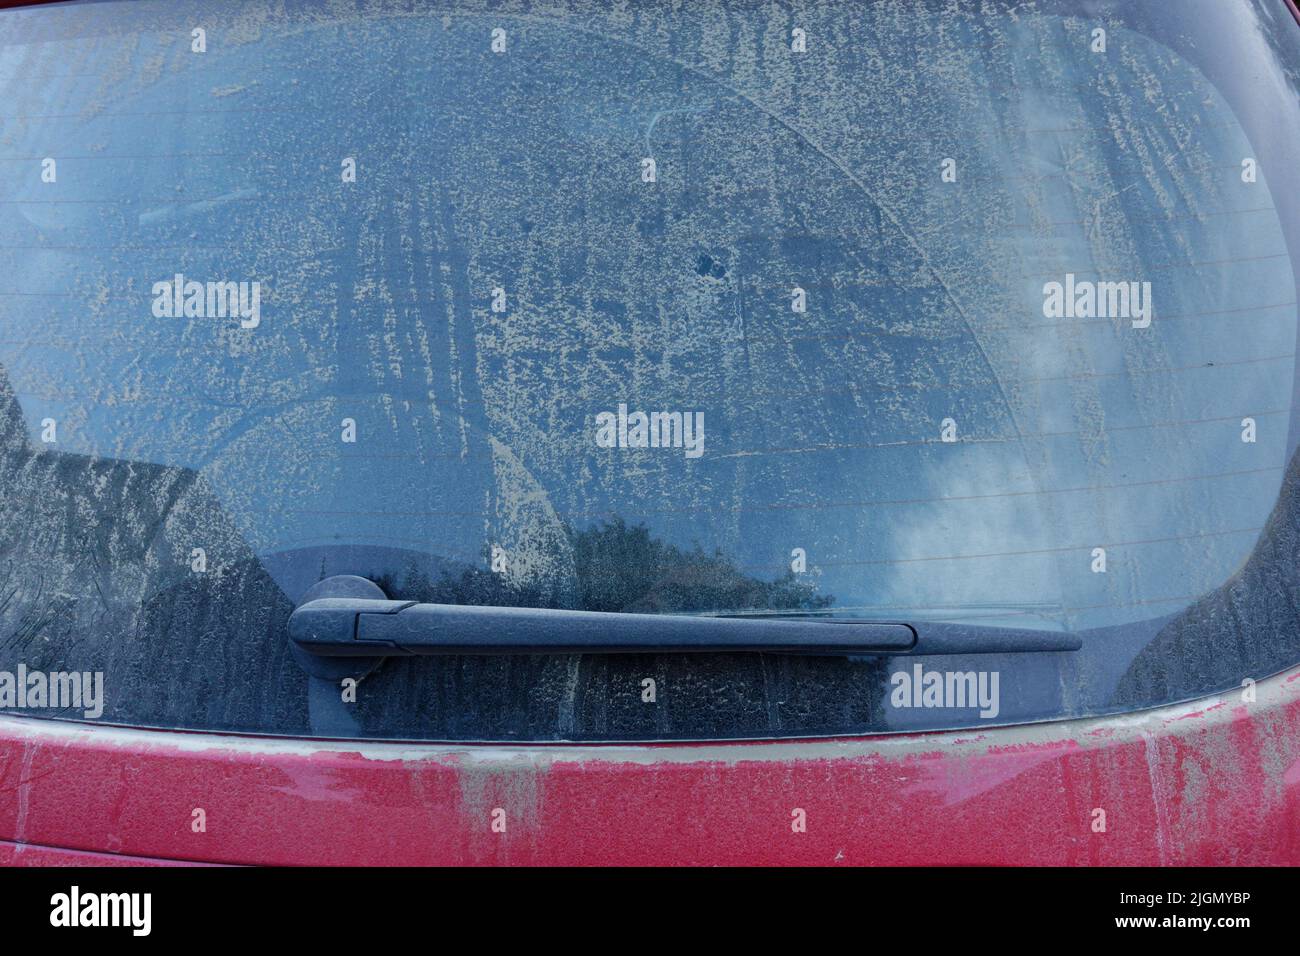 A dirty rear window obscuring a rear view of traffic for the driver on a hatchback car. Driving blind. Stock Photo